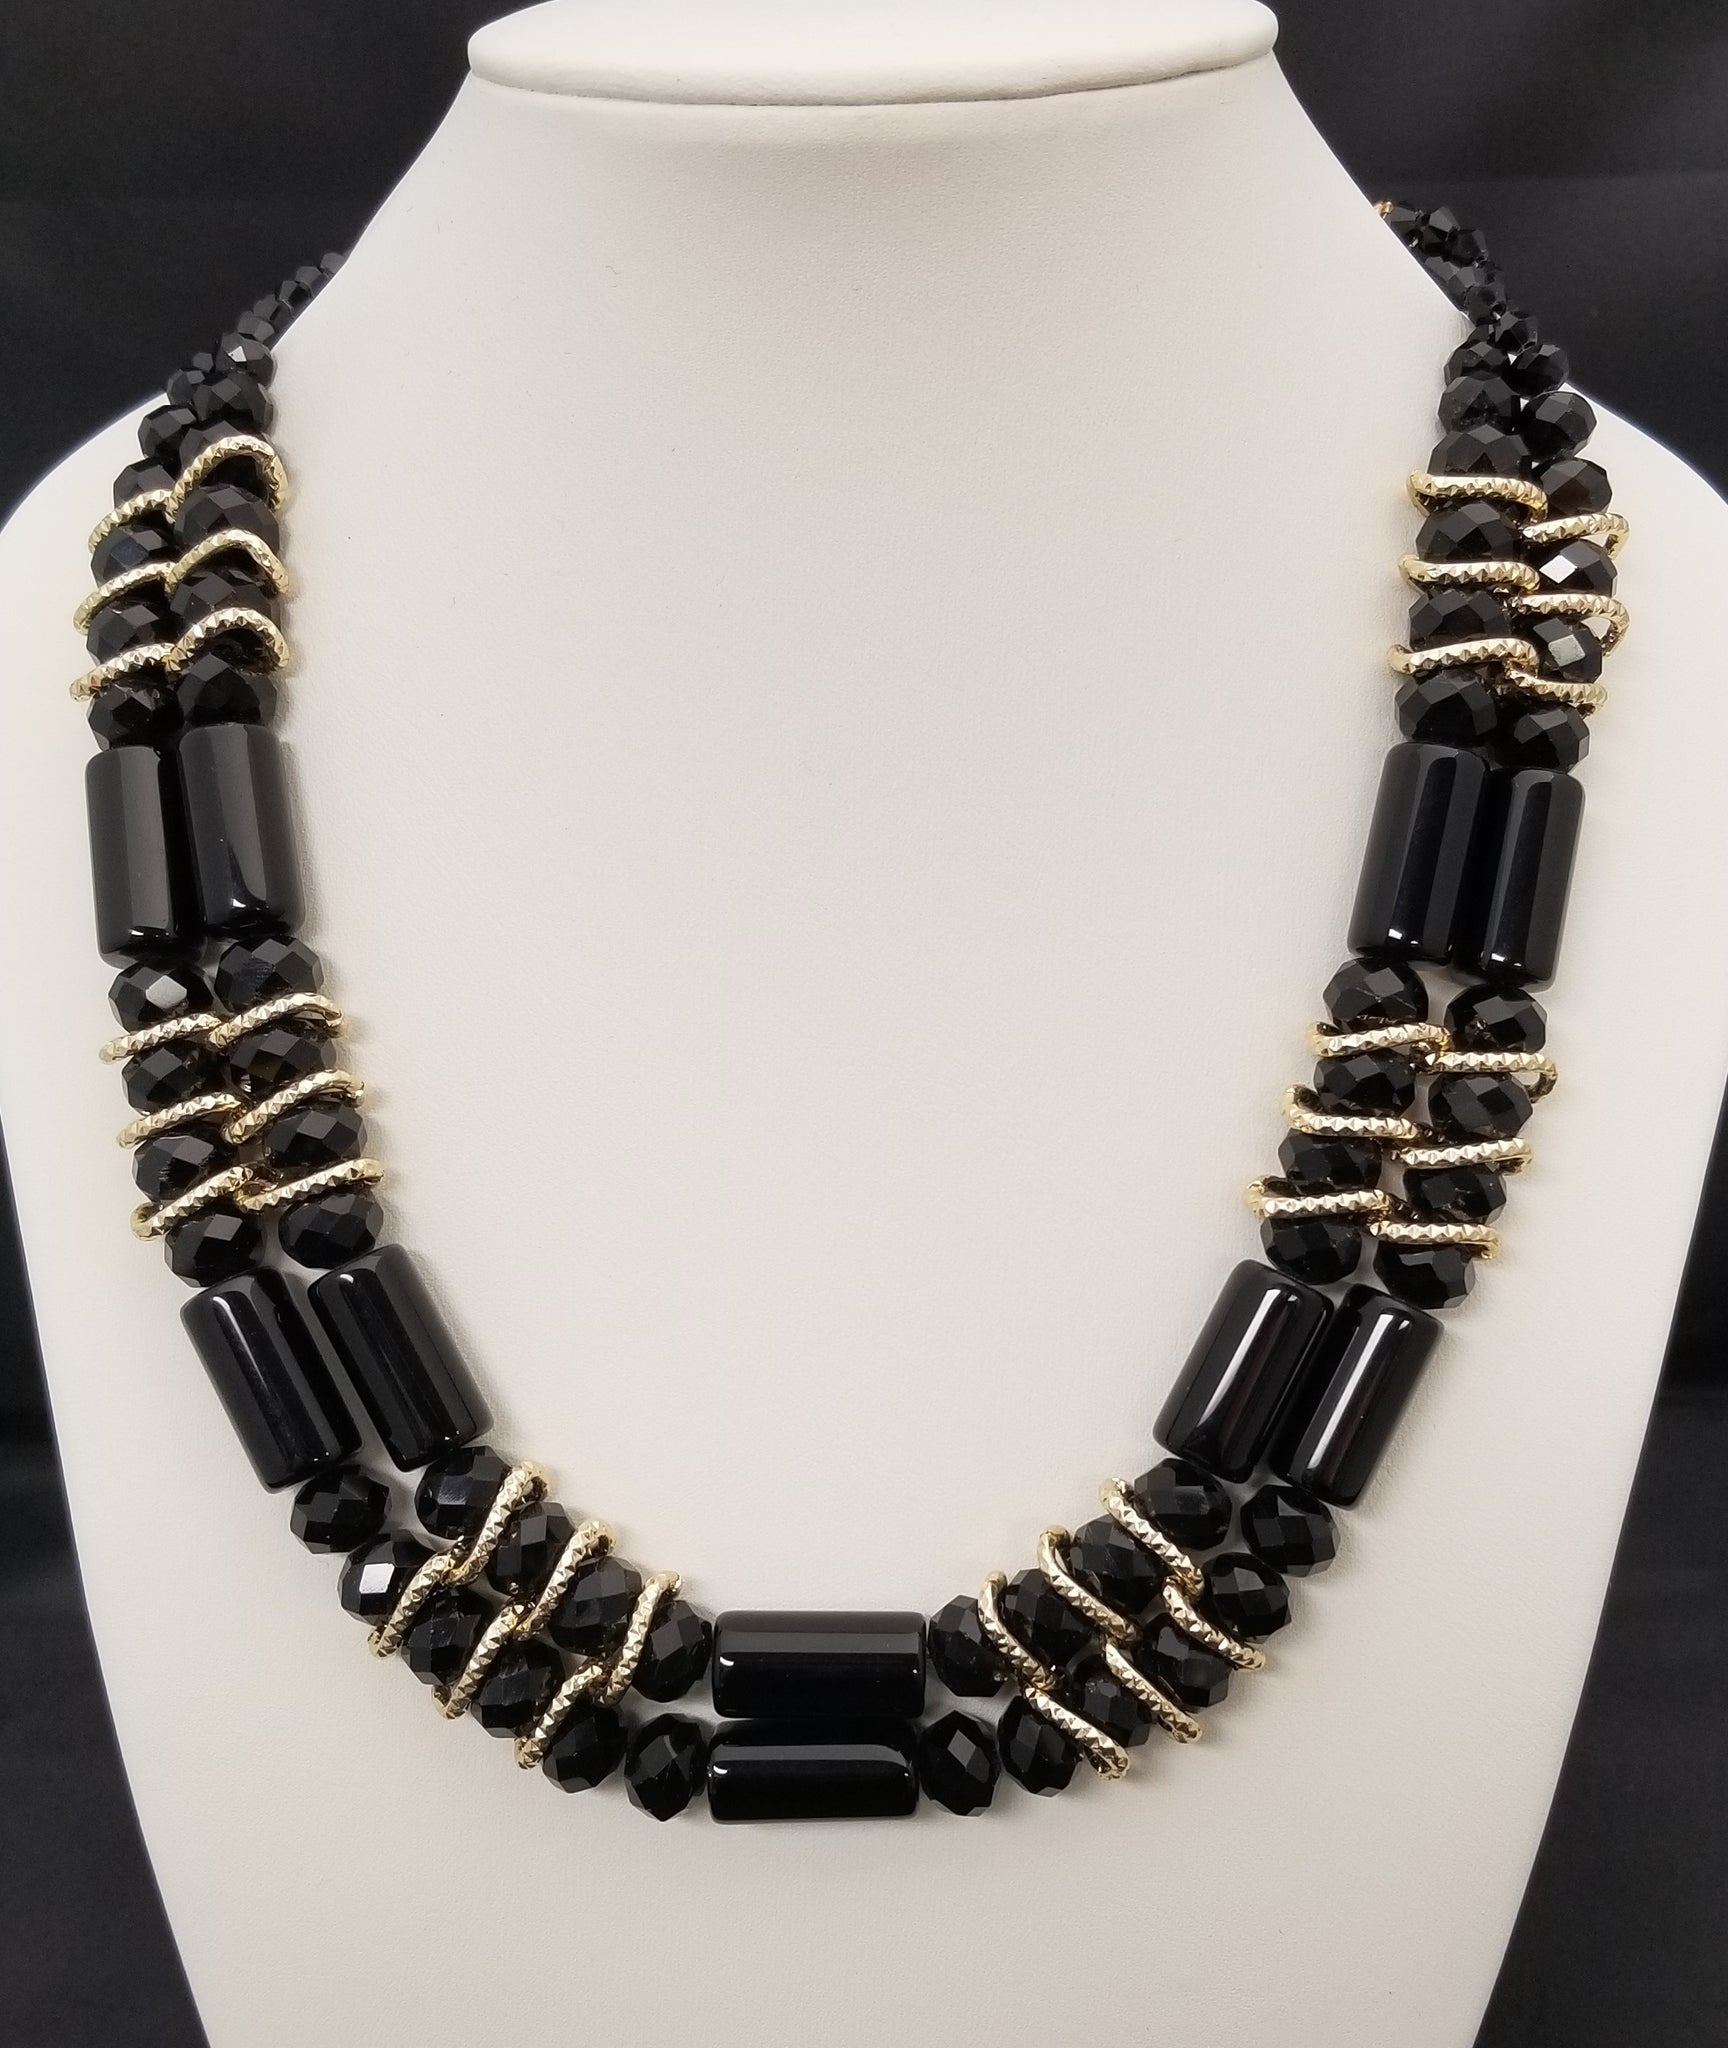 Black and gold Necklace with Dangle earrings